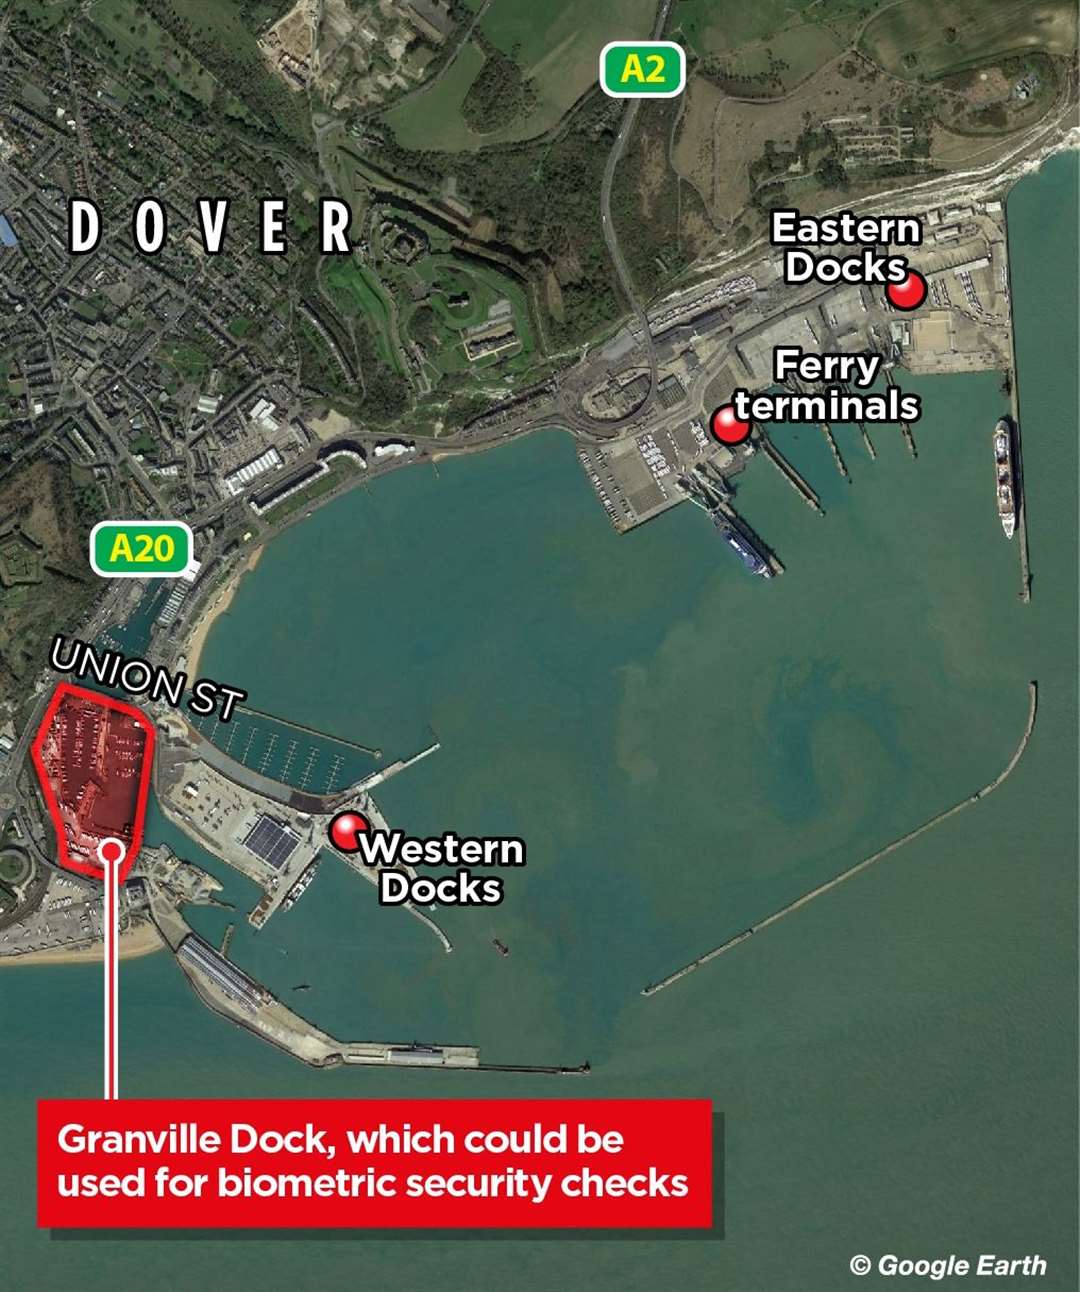 Granville Dock in Dover could be used for post-Brexit checks